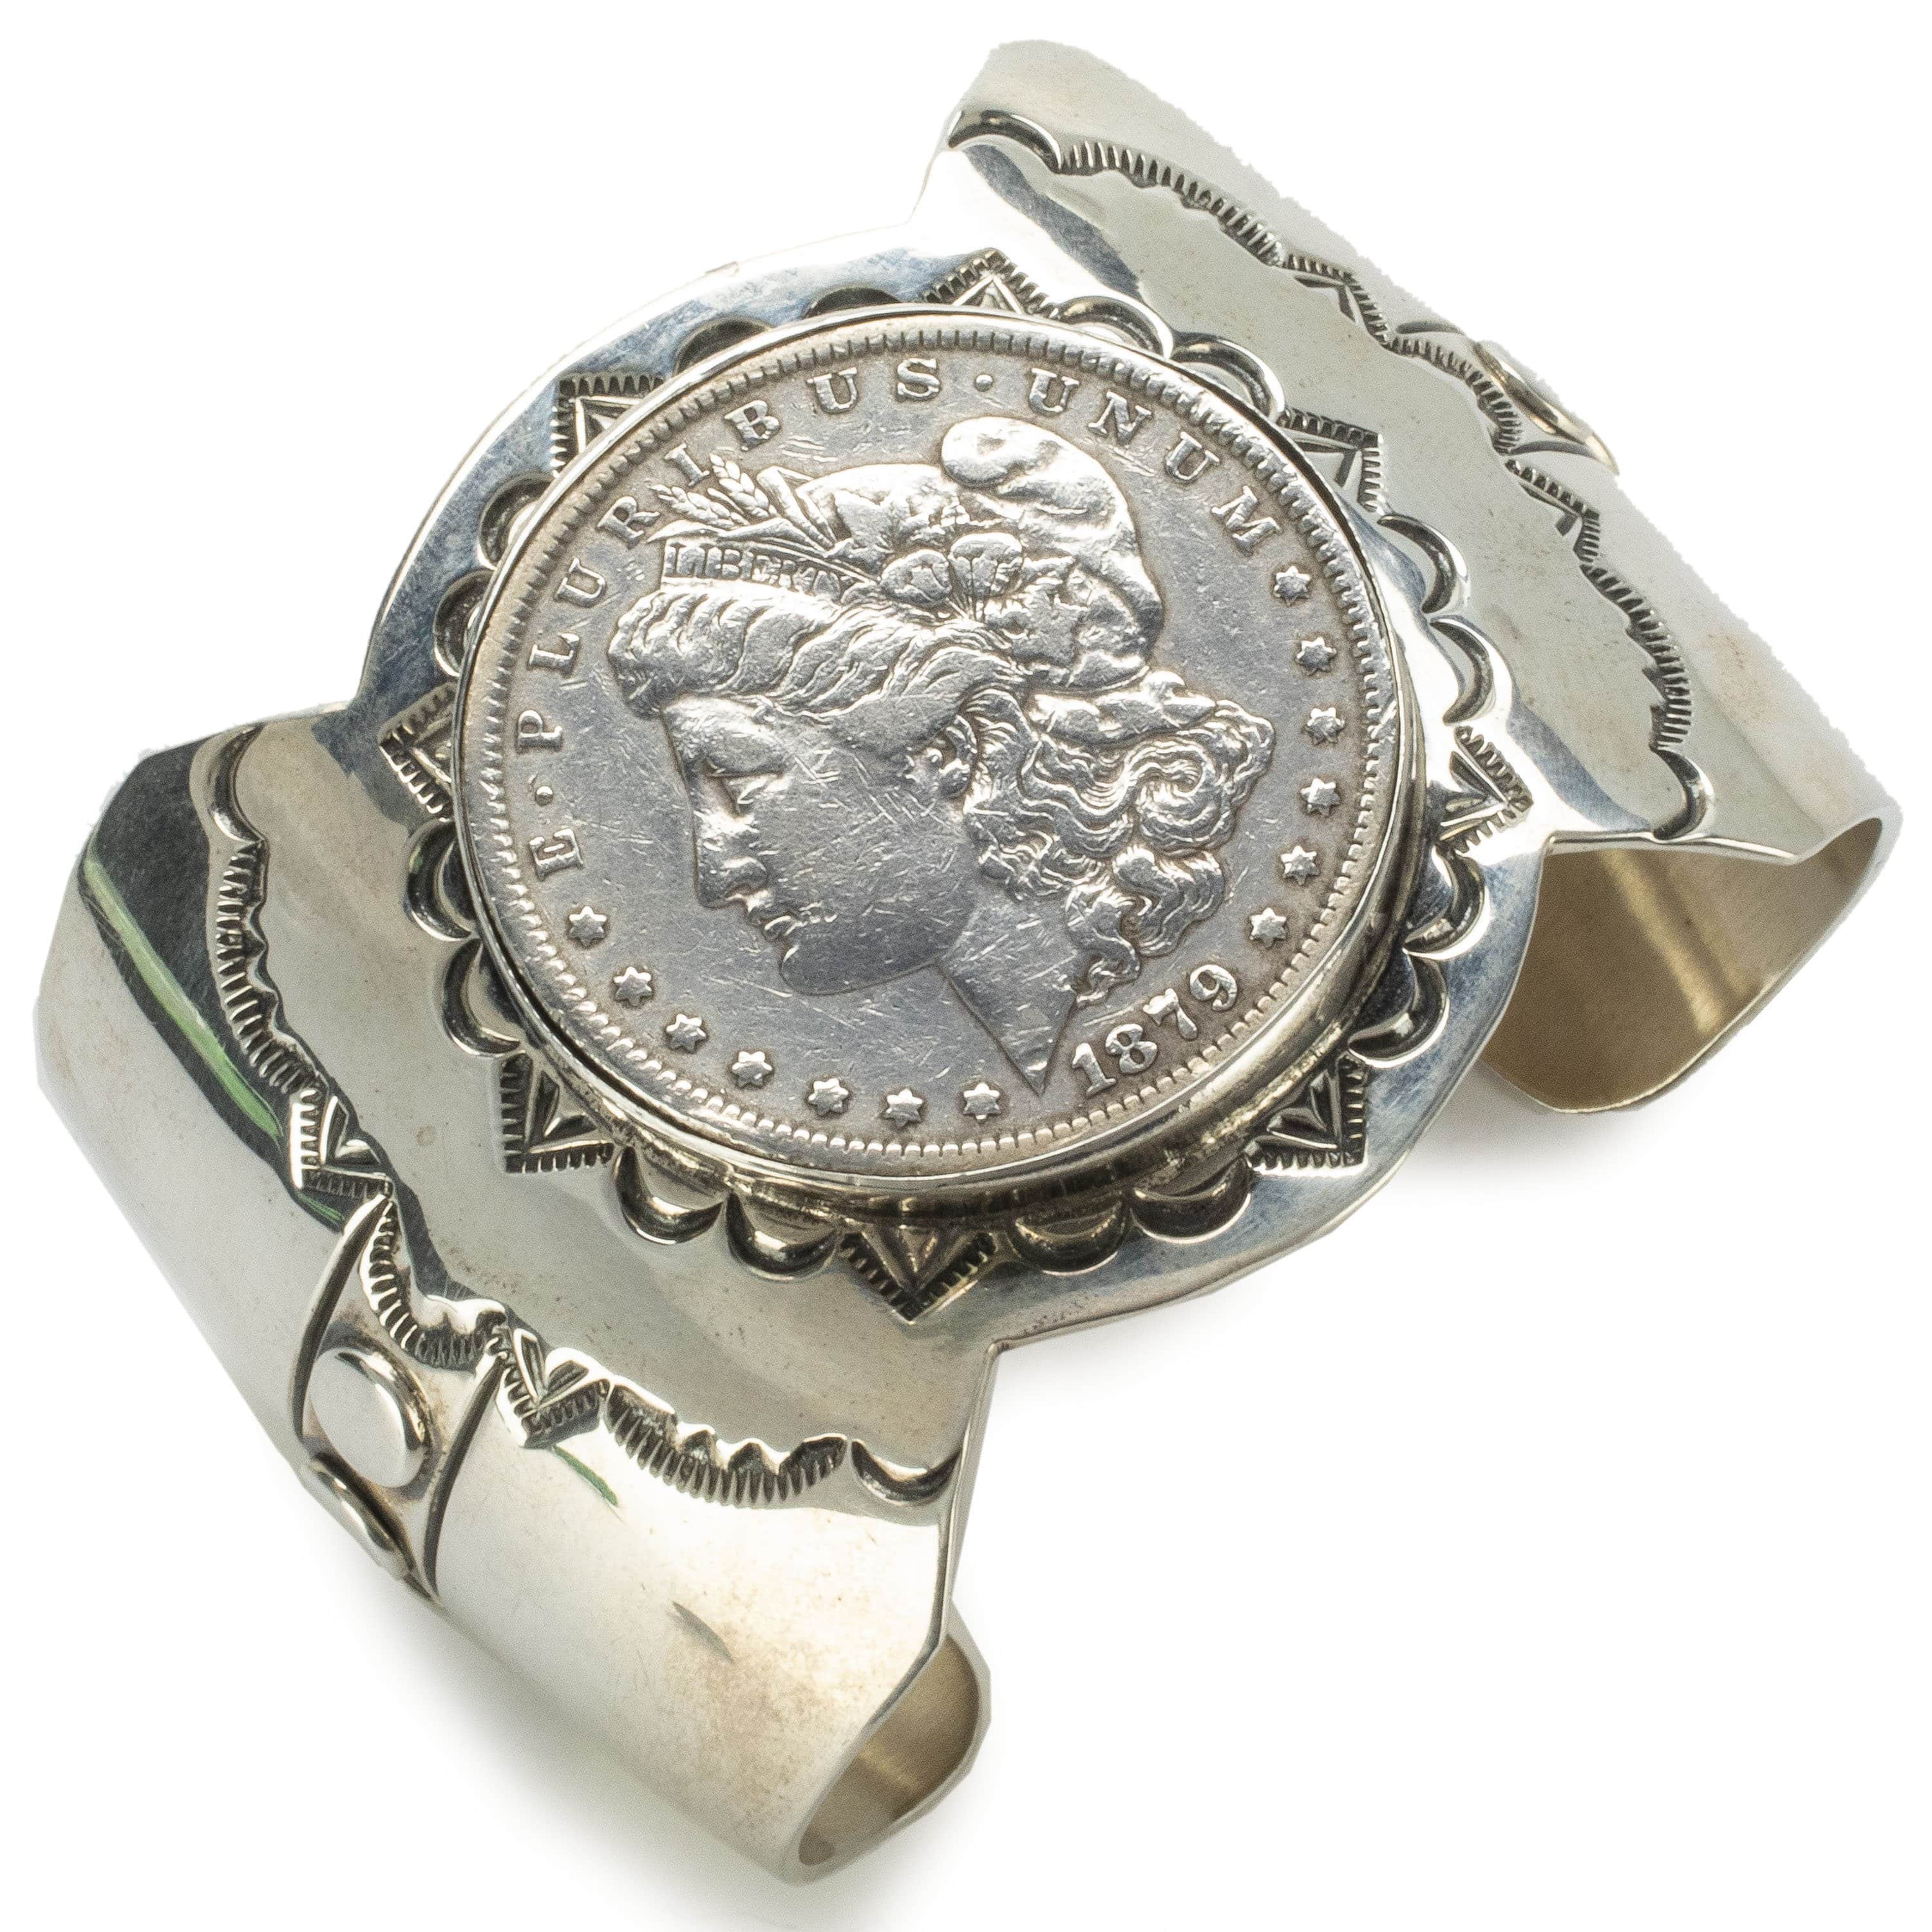 Kalifano Native American Jewelry Ronald Tom Navajo Coin USA Native American Made 925 Sterling Silver Cuff NAB2900.008